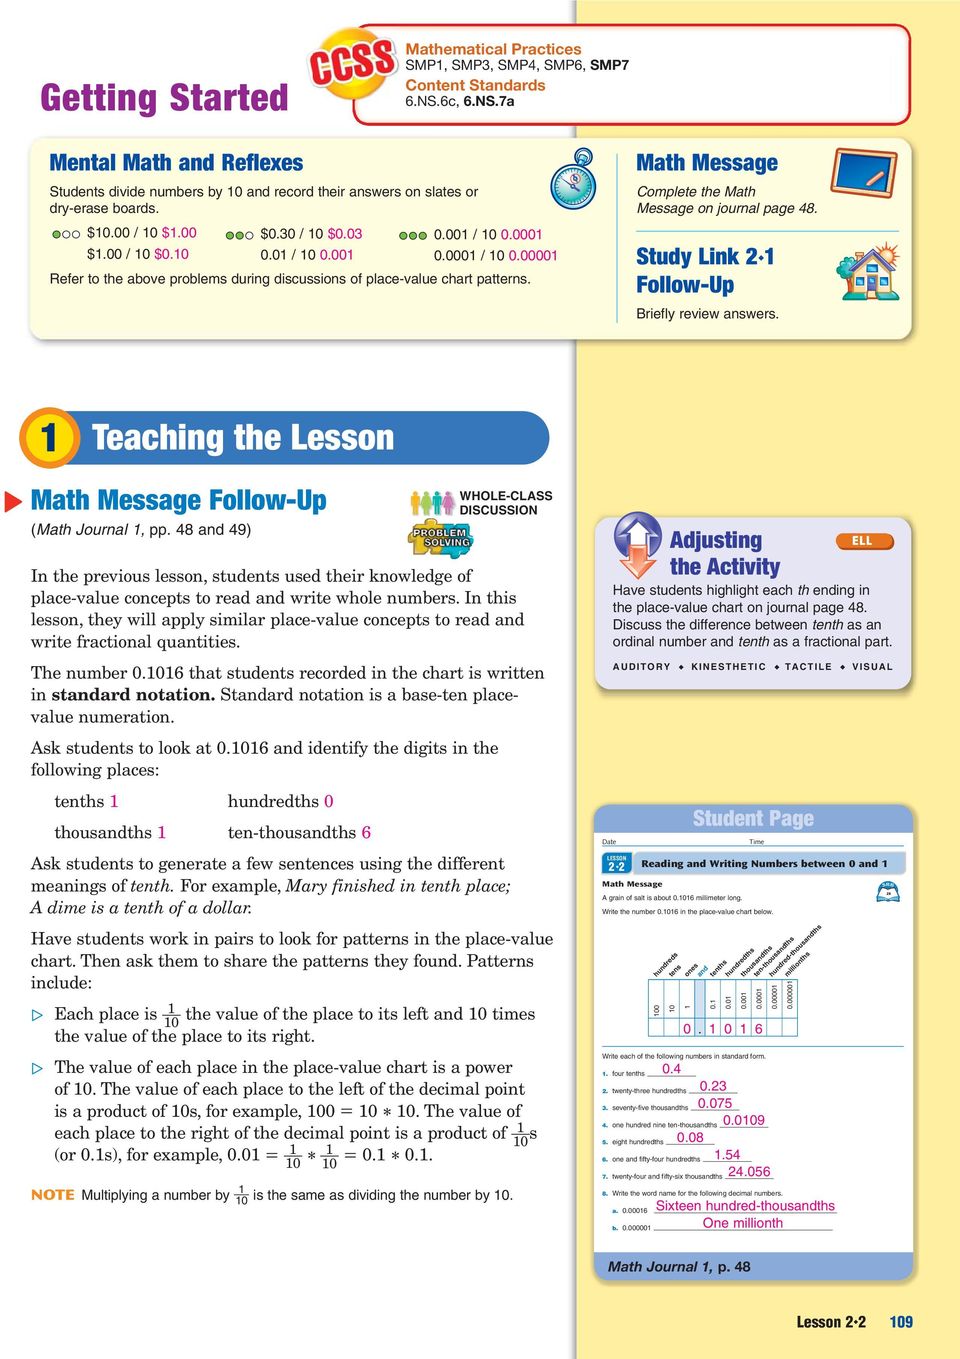 answers Teaching the Lesson Math Message Follow-Up (Math Journal, pp 48 49) WHOLE-CLASS DISCUSSION In the previous lesson, students used their knowledge of place-value concepts to read write whole